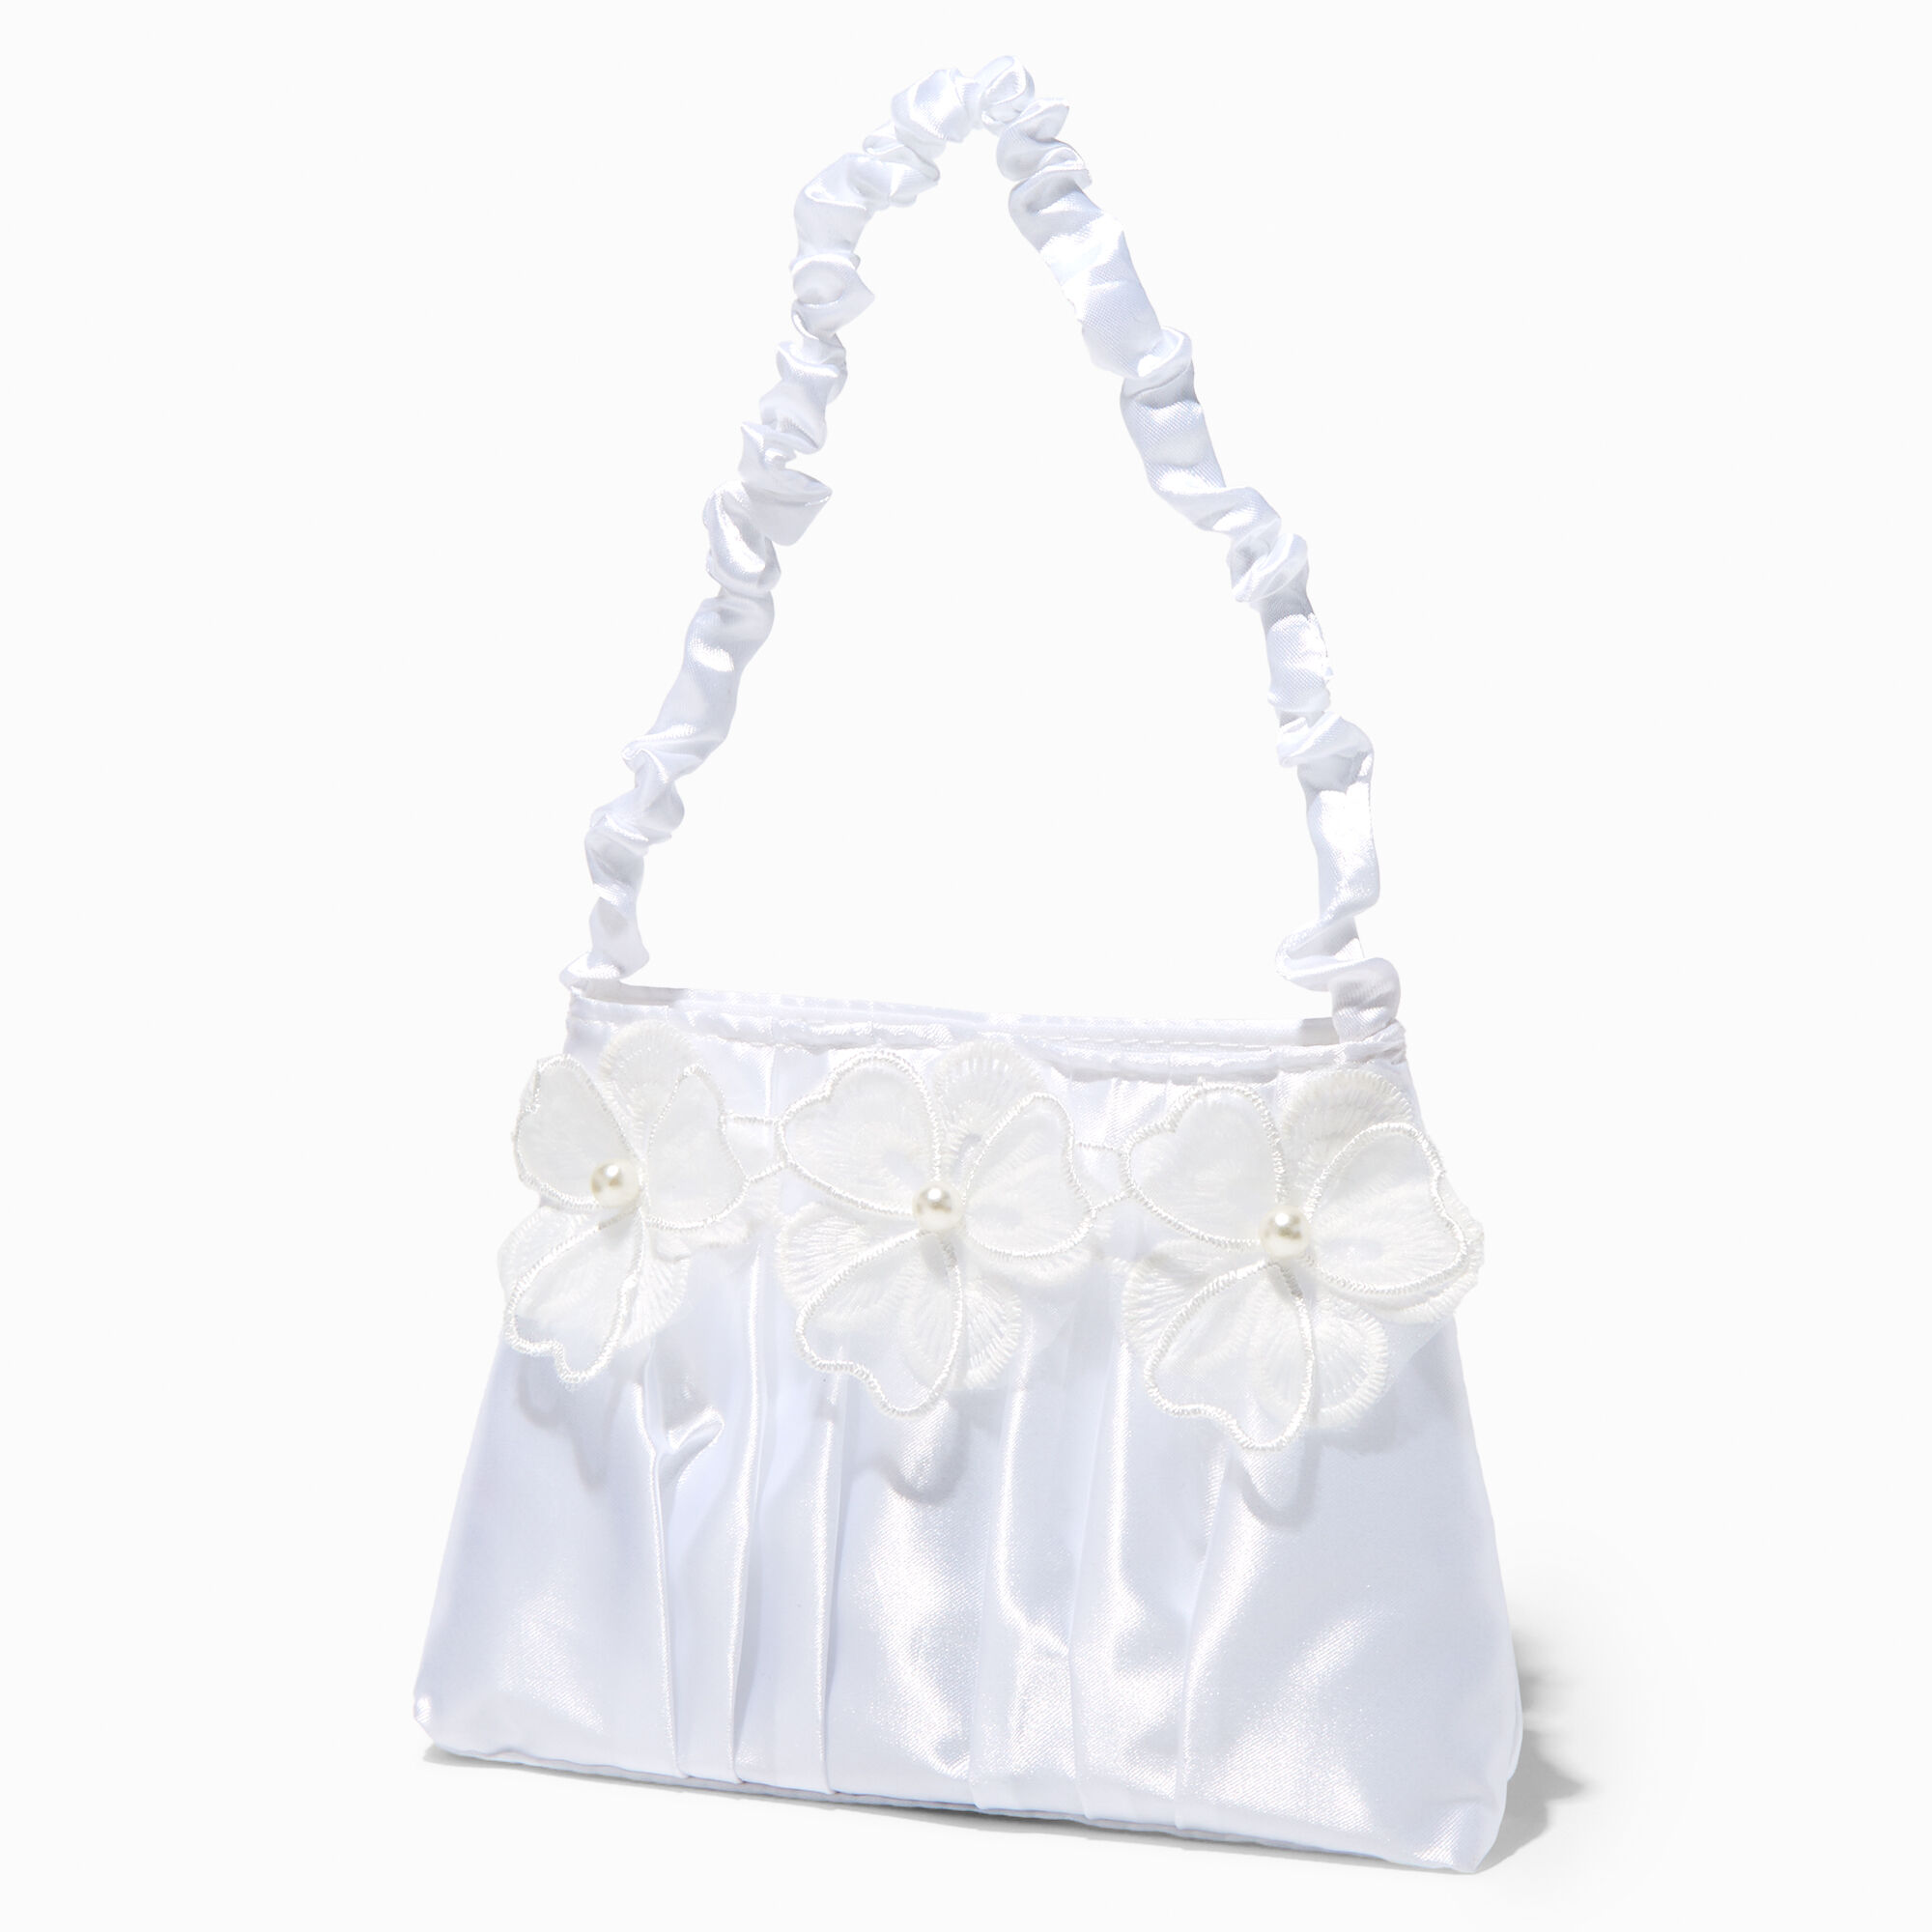 View Claires Club Special Occasion Satin Pearl Flower Handbag information